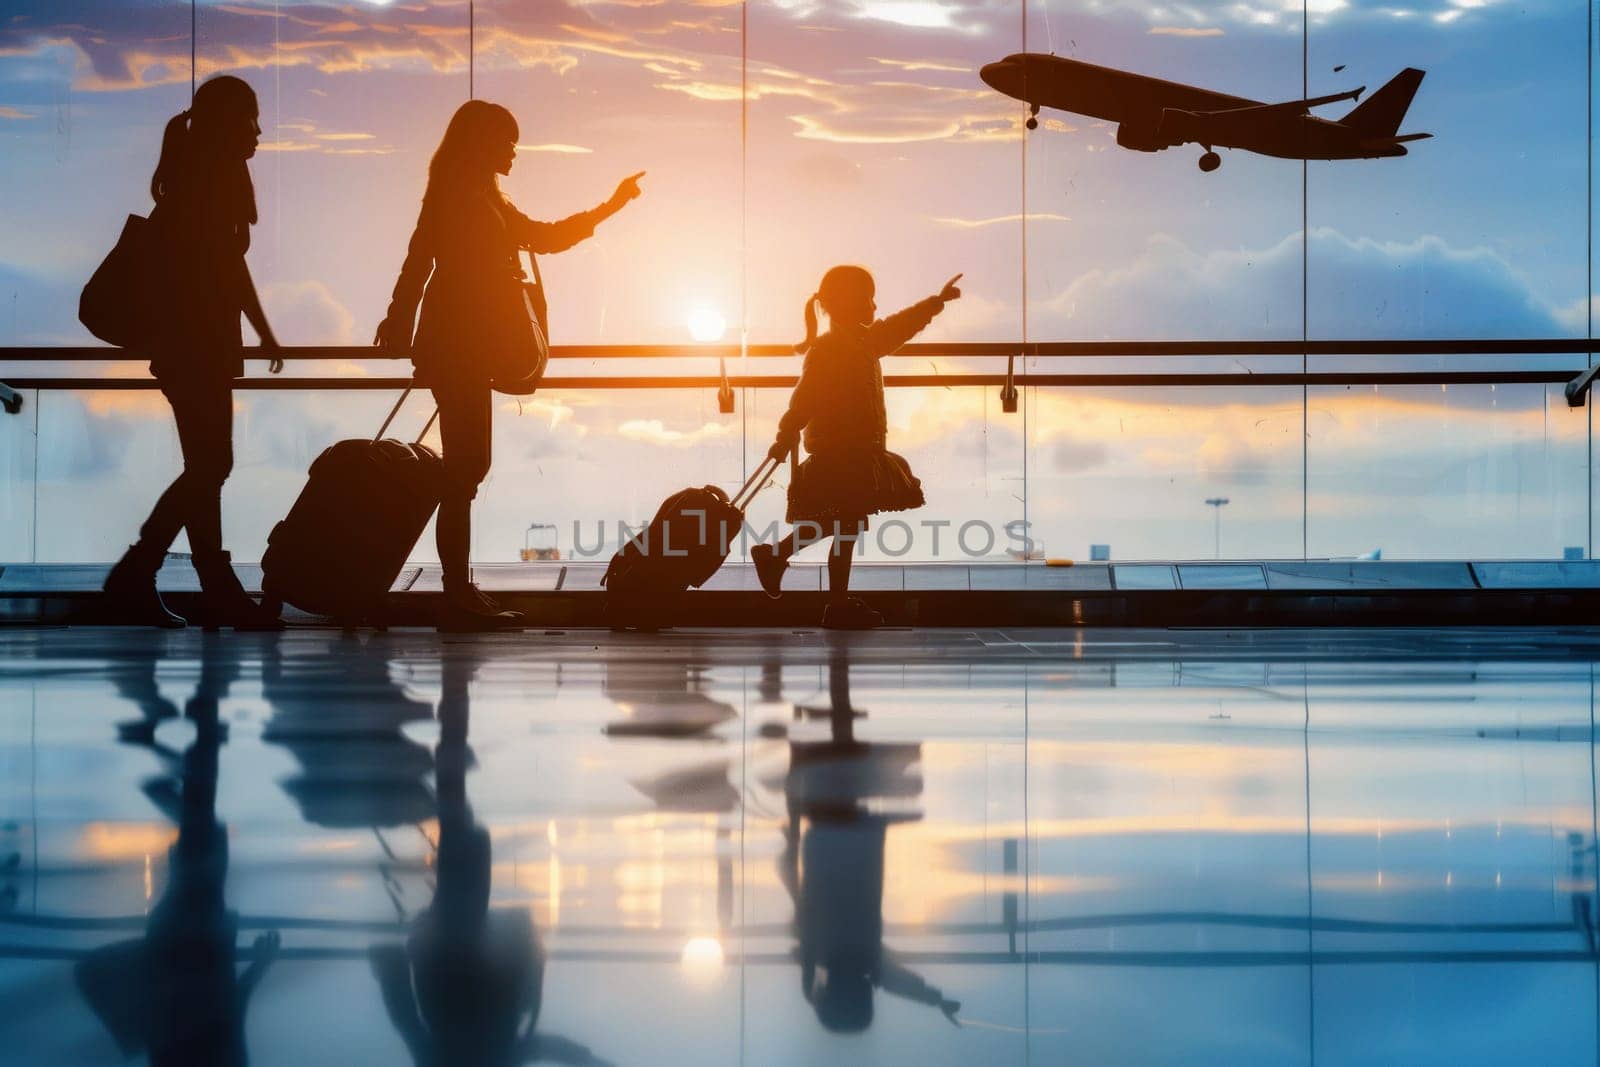 A family of three is walking through an airport with luggage by golfmerrymaker